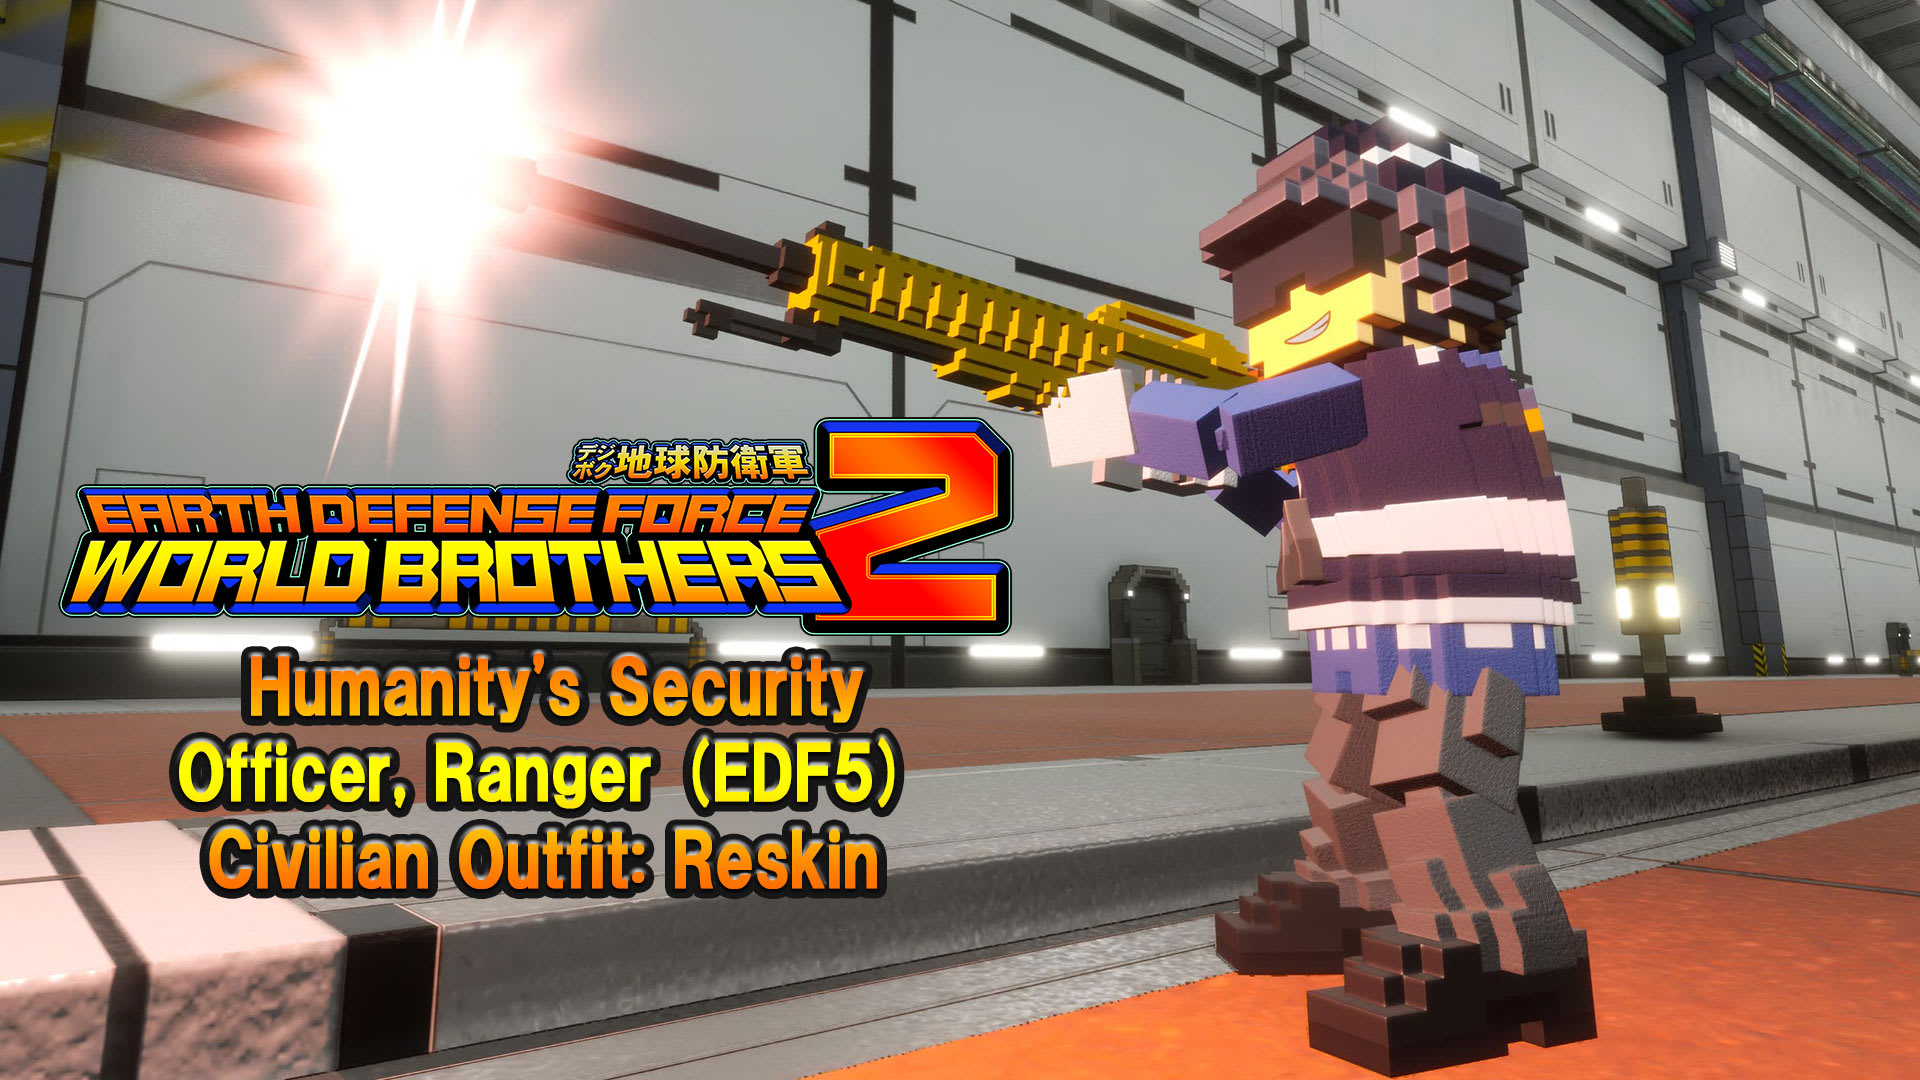 "Additional character" Humanity's Security Officer, Ranger (EDF5) Civilian Outfit: Reskin